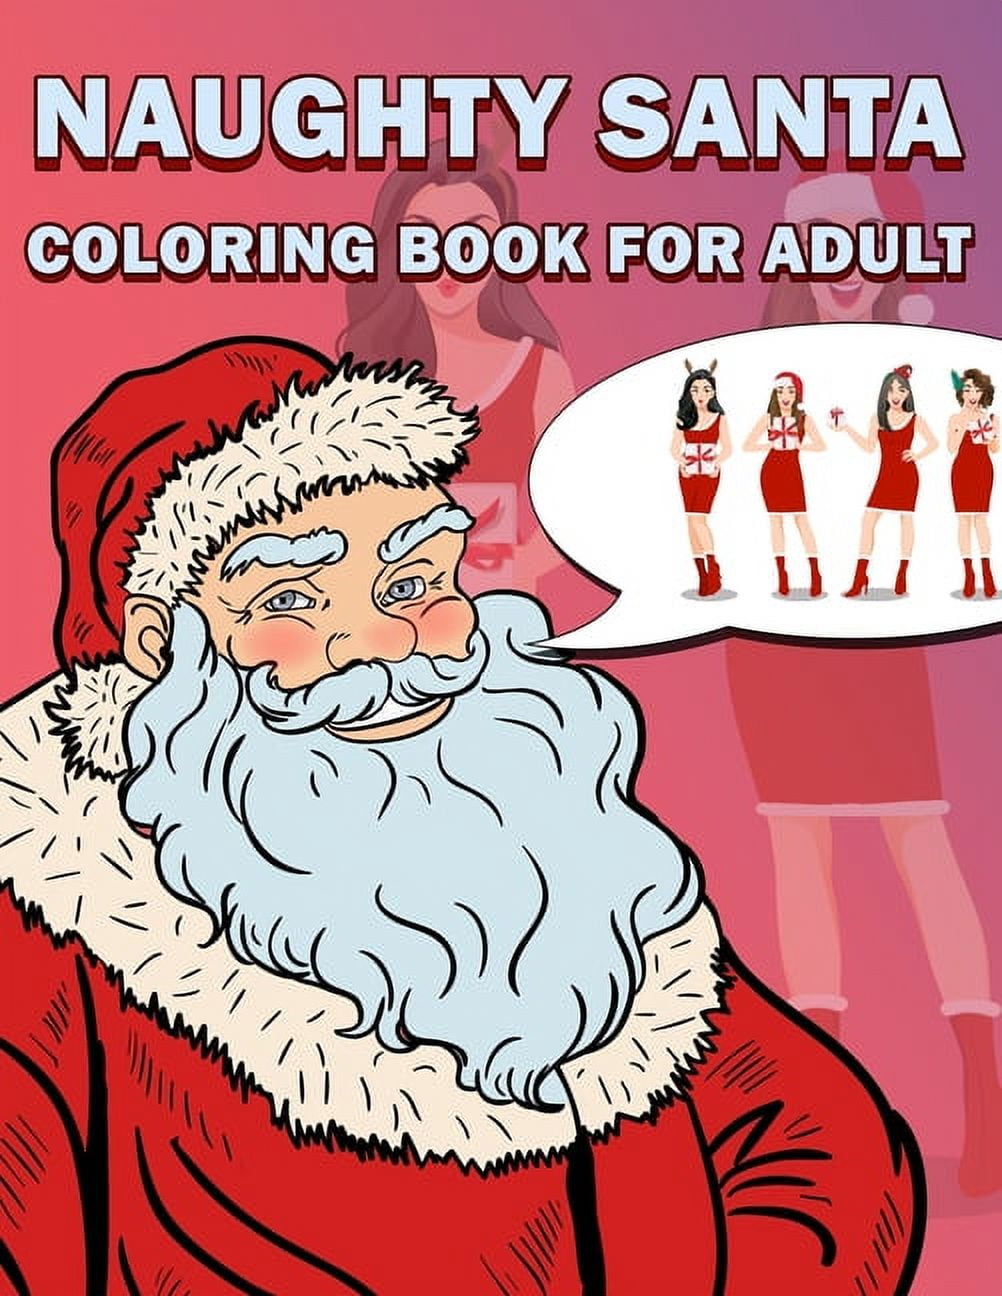 Christmas Coloring Books Bulk: Christmas Coloring Books Bulk, Christmas Coloring Book, Christmas Coloring Book for Toddlers. 50 Pages 8.5x 11 [Book]